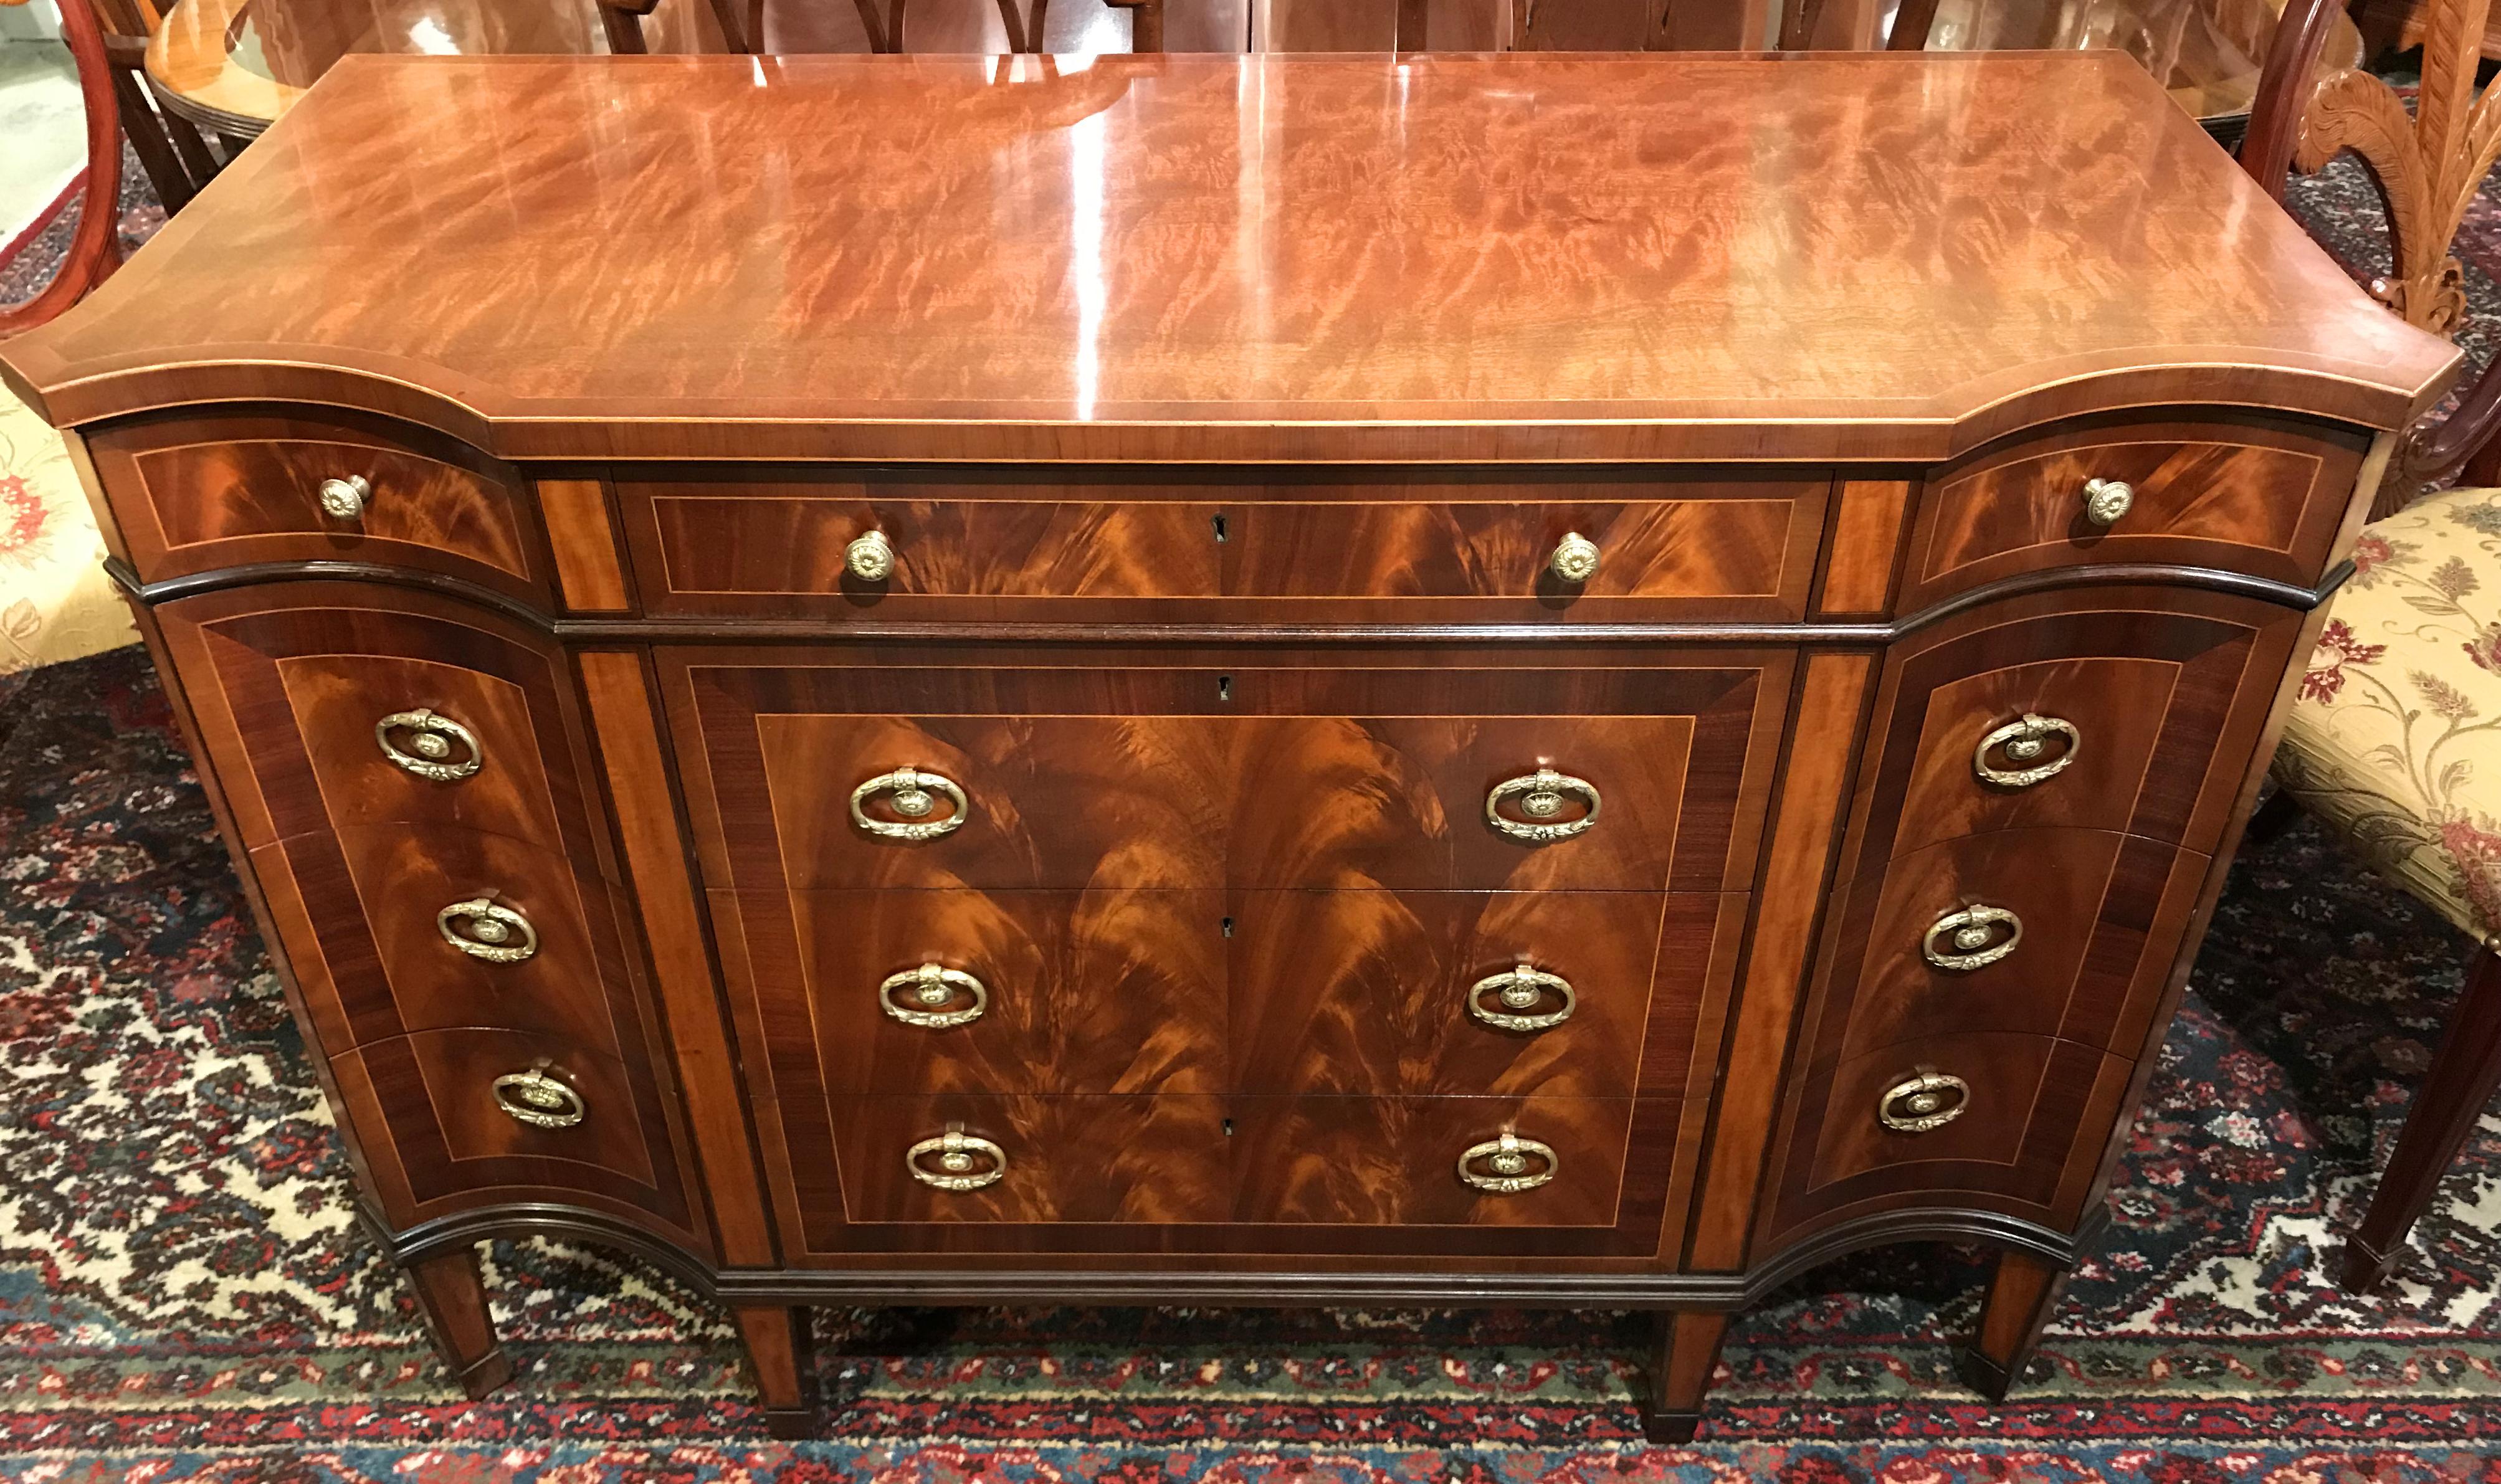 An exceptional custom made chest of drawers or sideboard by Schmieg & Kotzian of New York, with conforming top surmounting three fitted frieze drawers over three long drawers flanked by three fitted conforming drawers on each side, all with